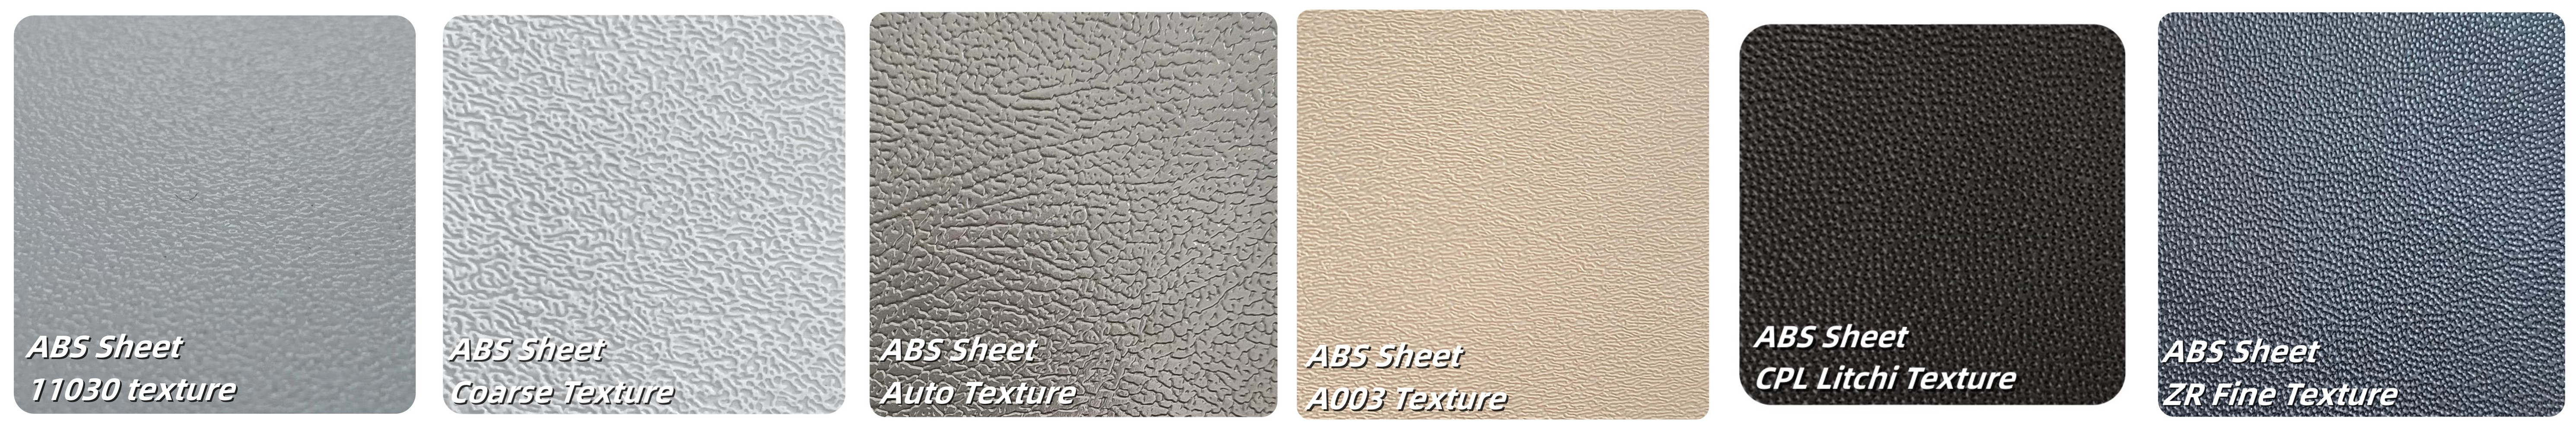 ABS texture